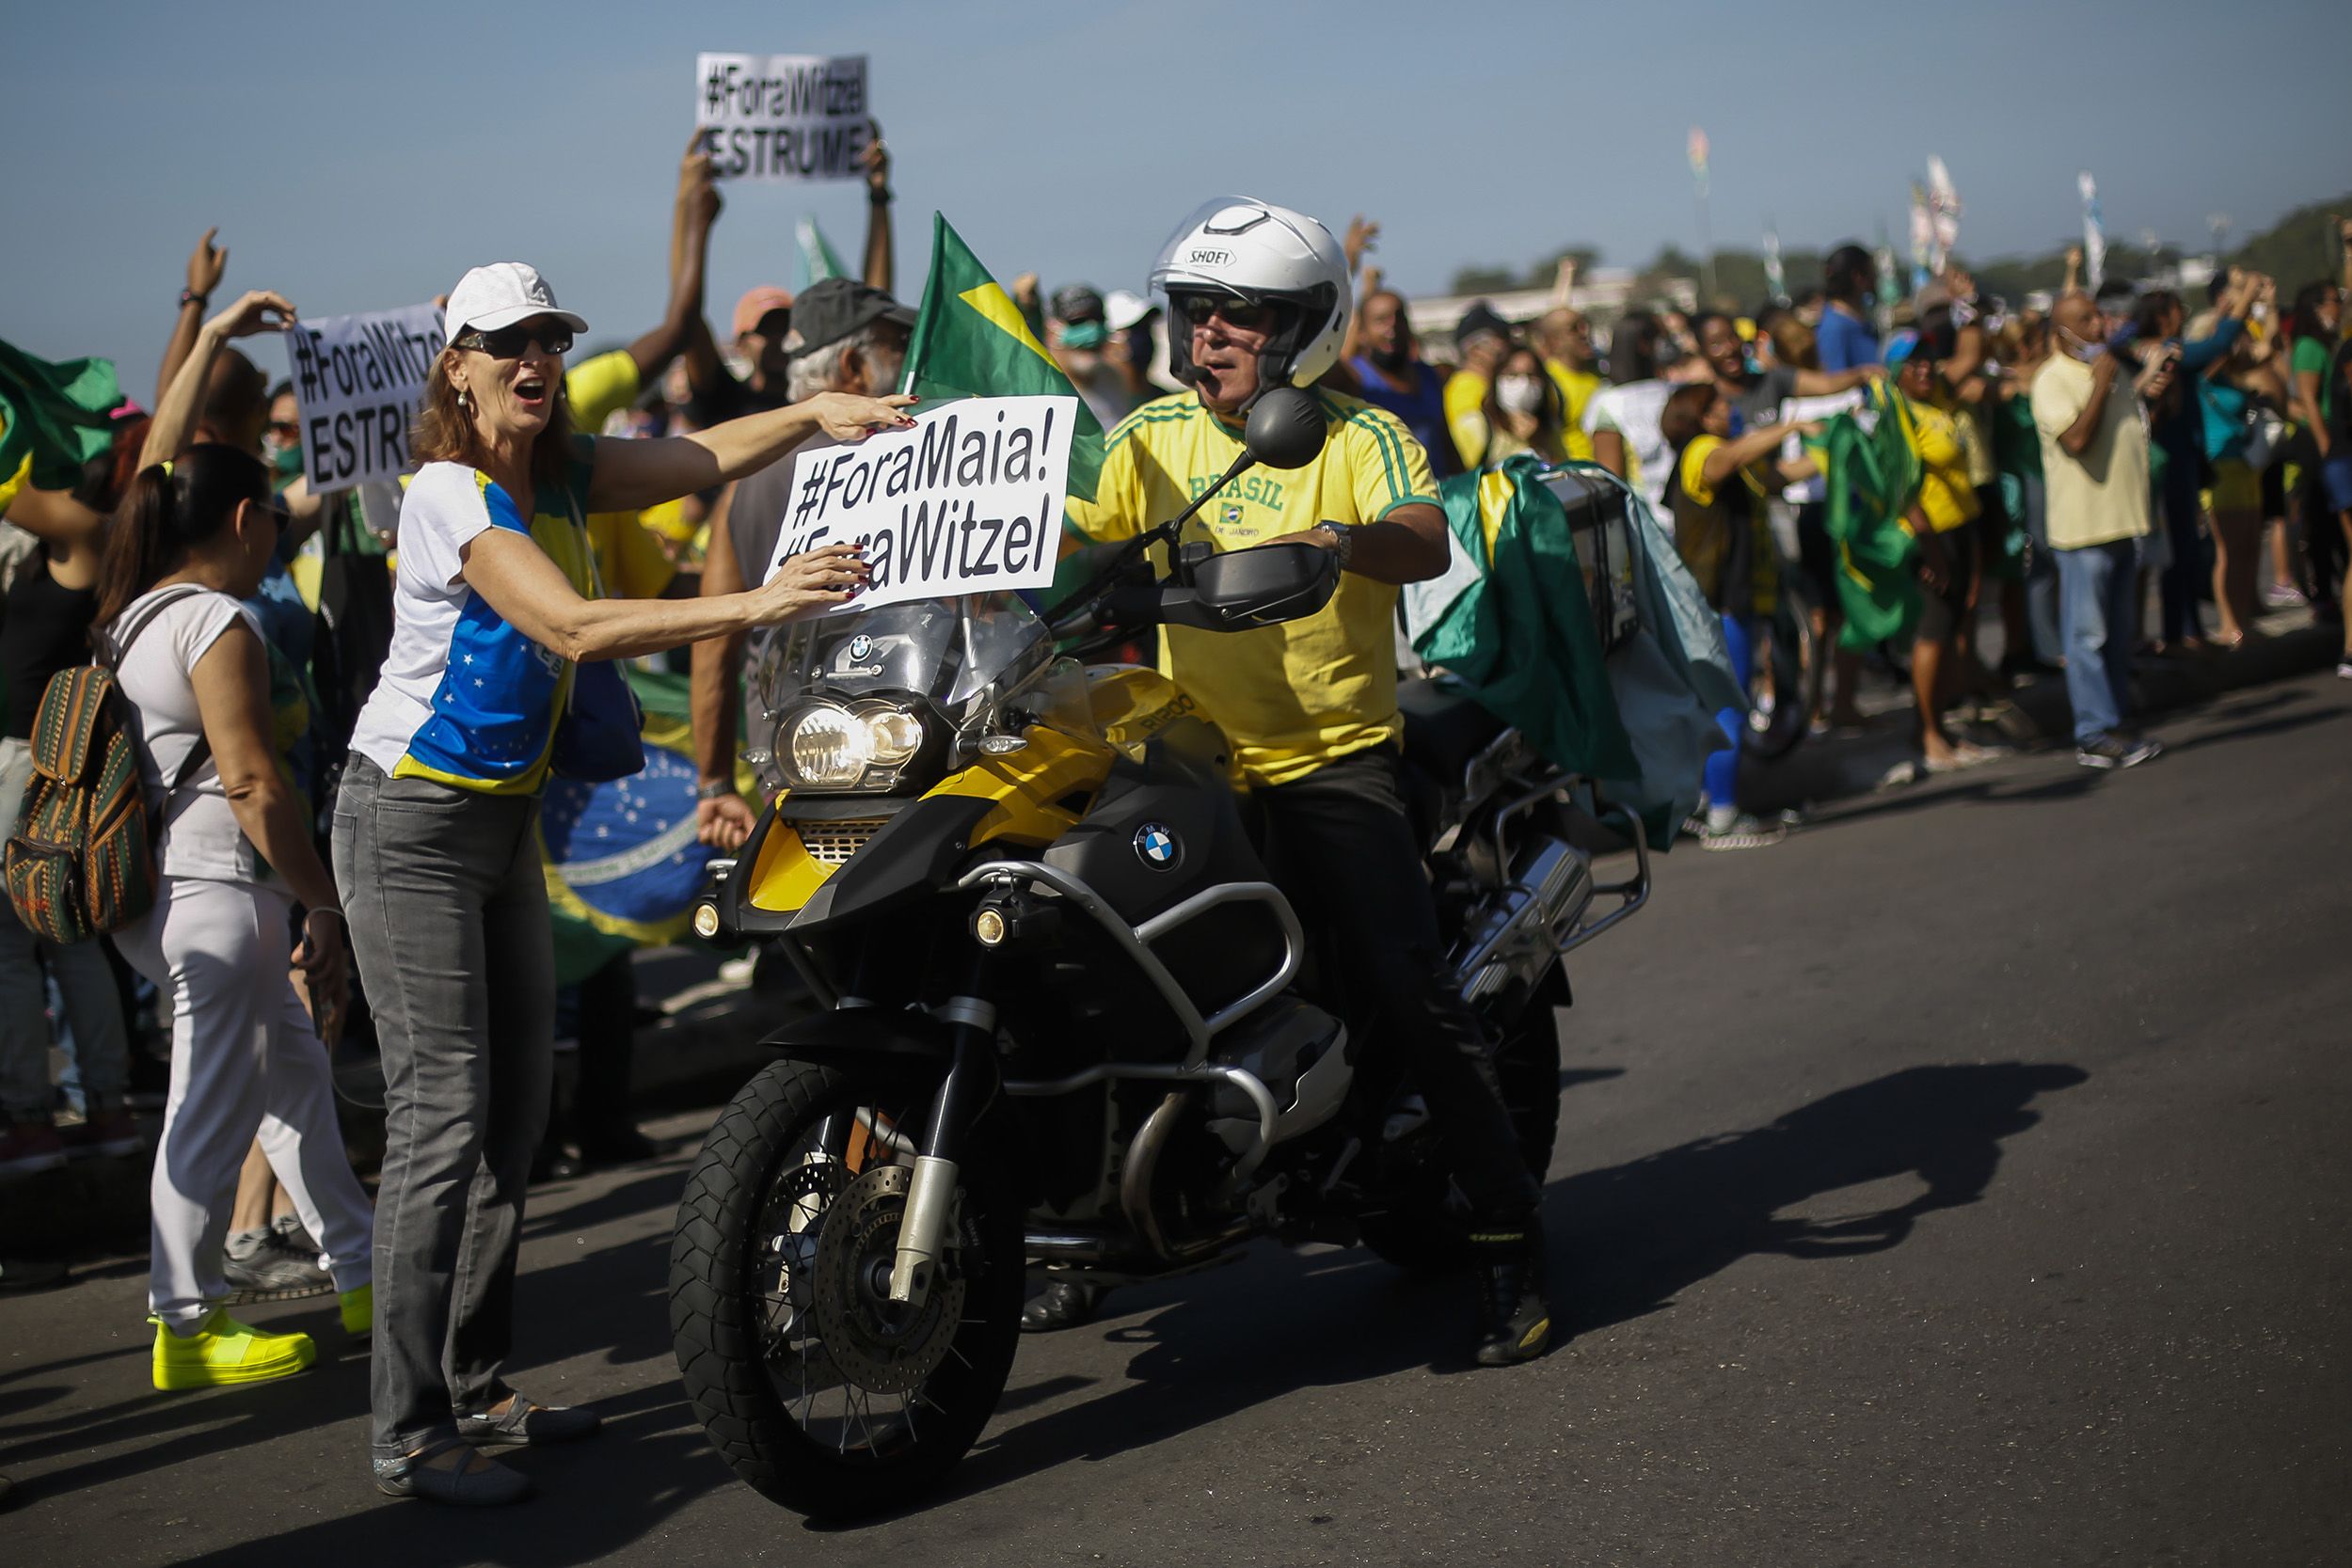 How the famous yellow football jersey of Brazil was politicised. If you are  wearing the iconic Canarinho jersey, are you far-right?